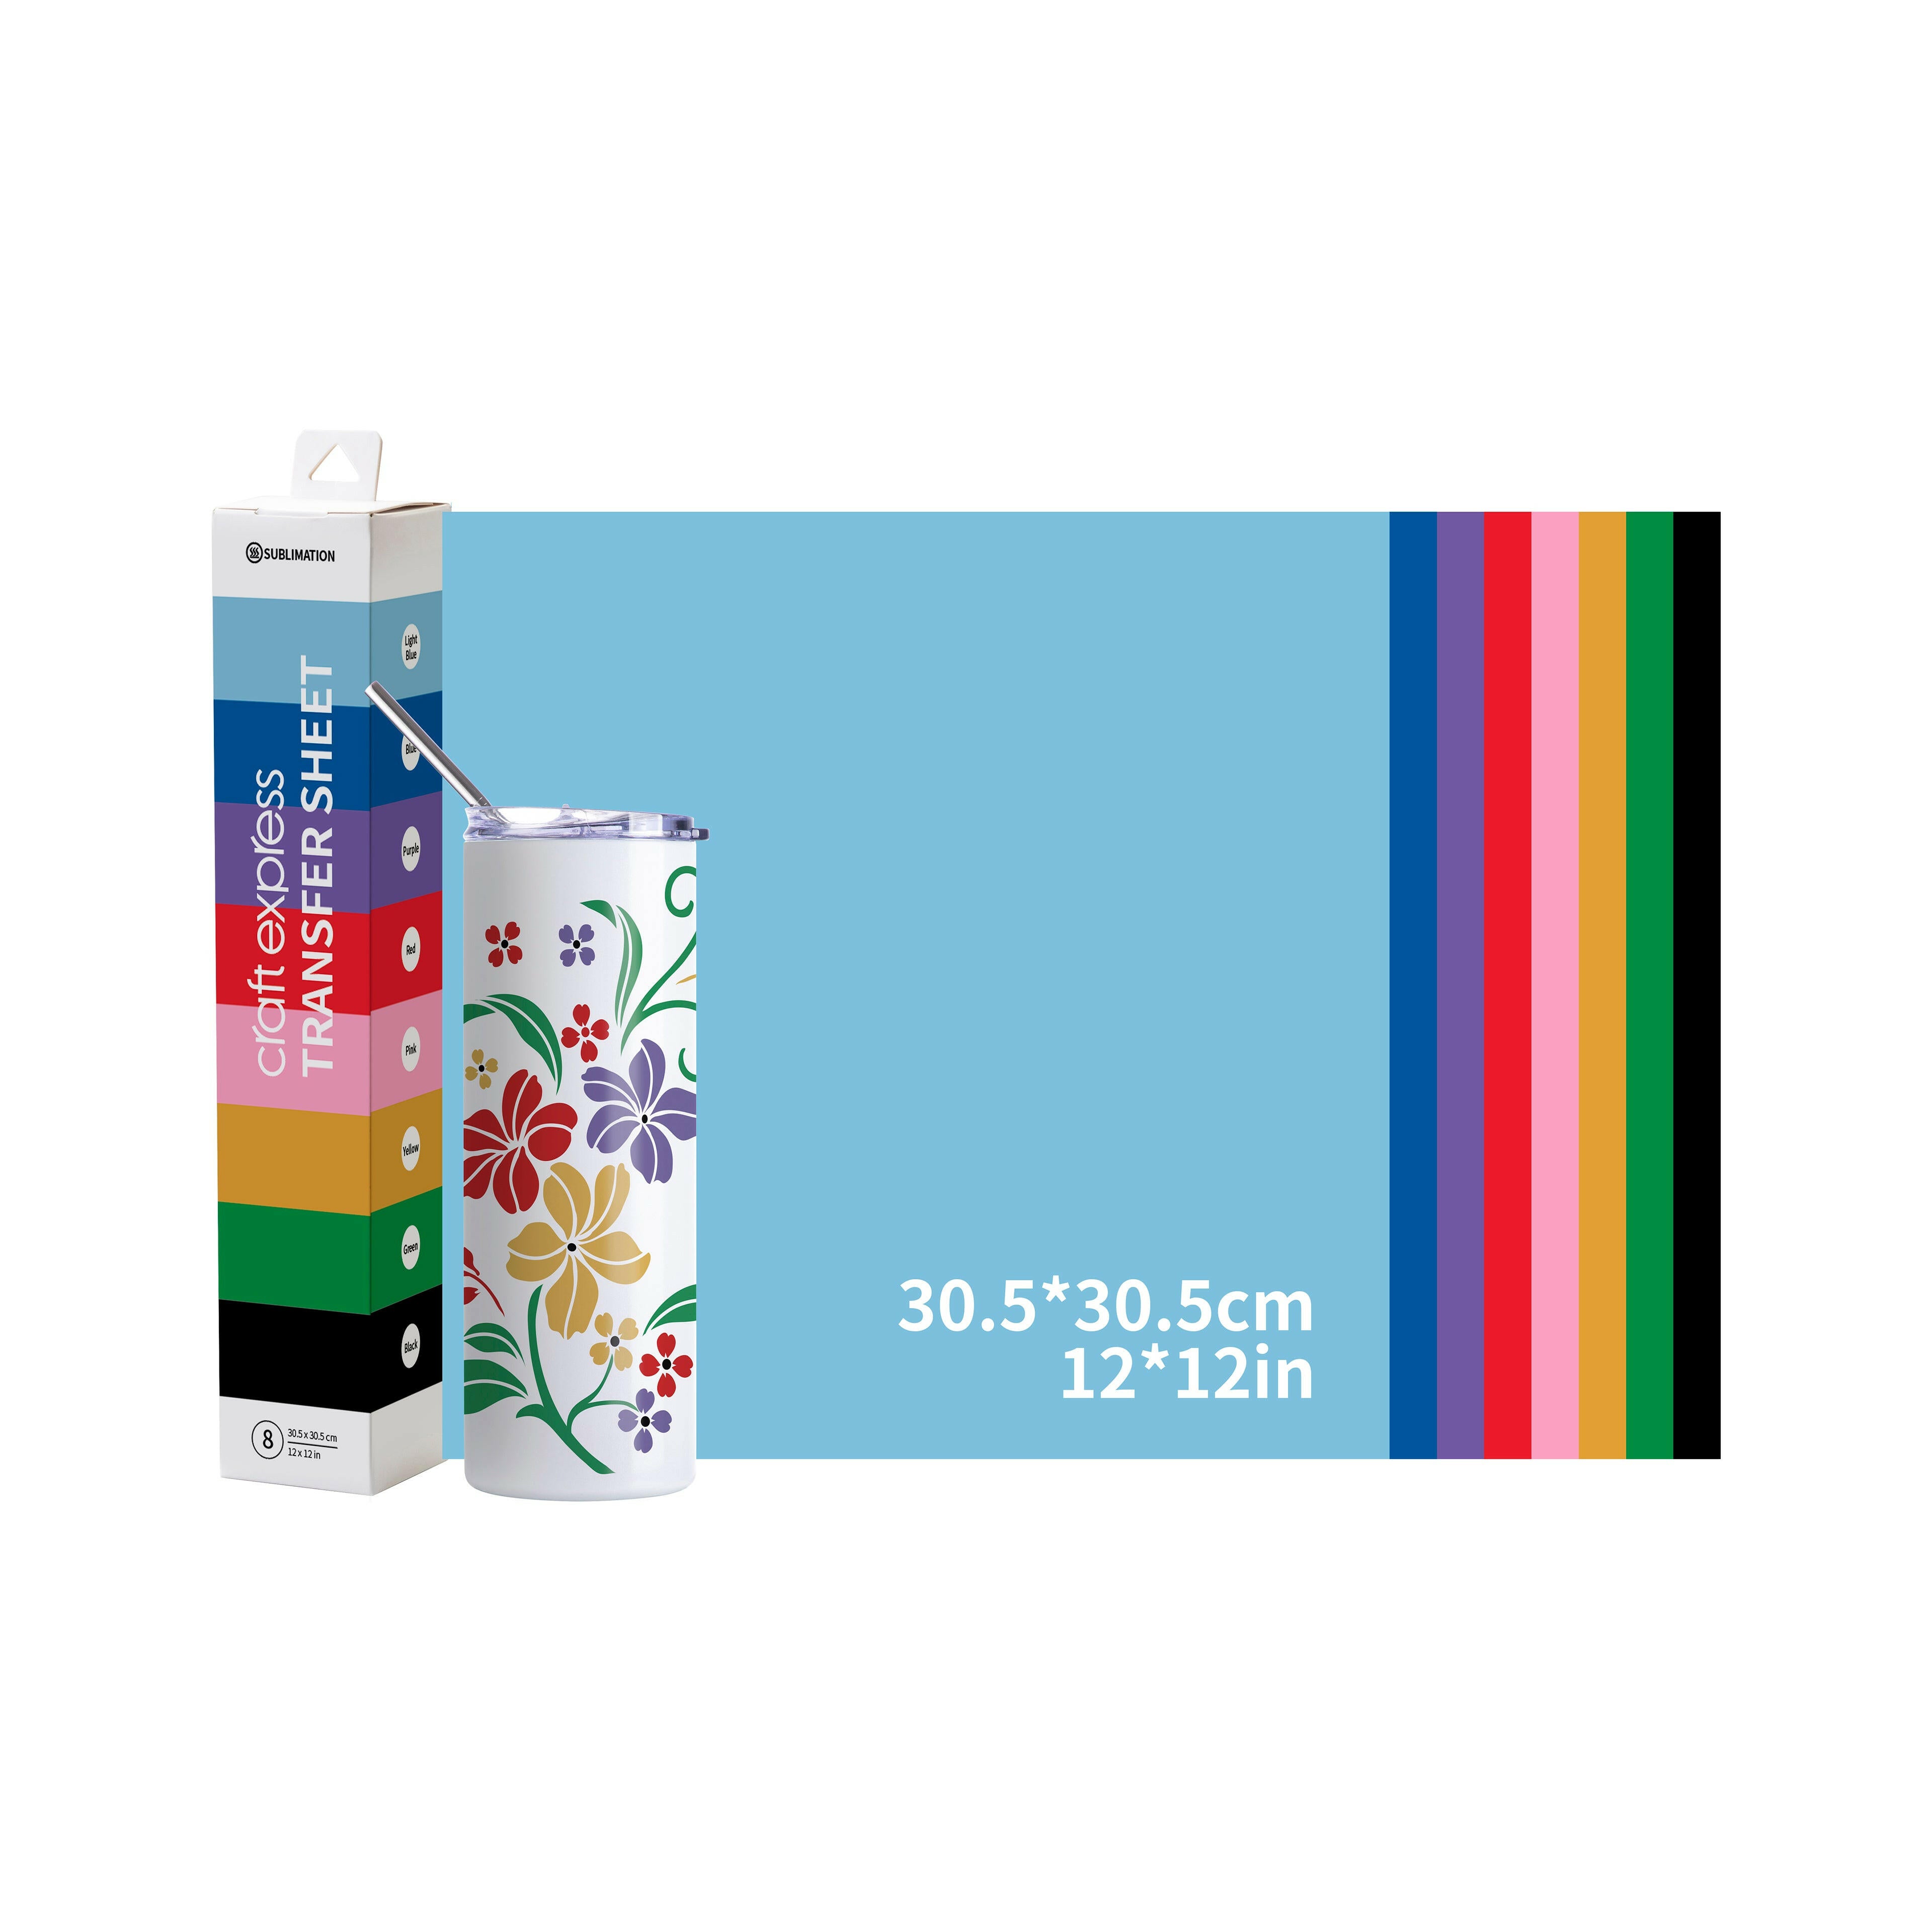 12" x 12" Solid Color Assorted Sublimation Transfers Sheets - 8 Pack.